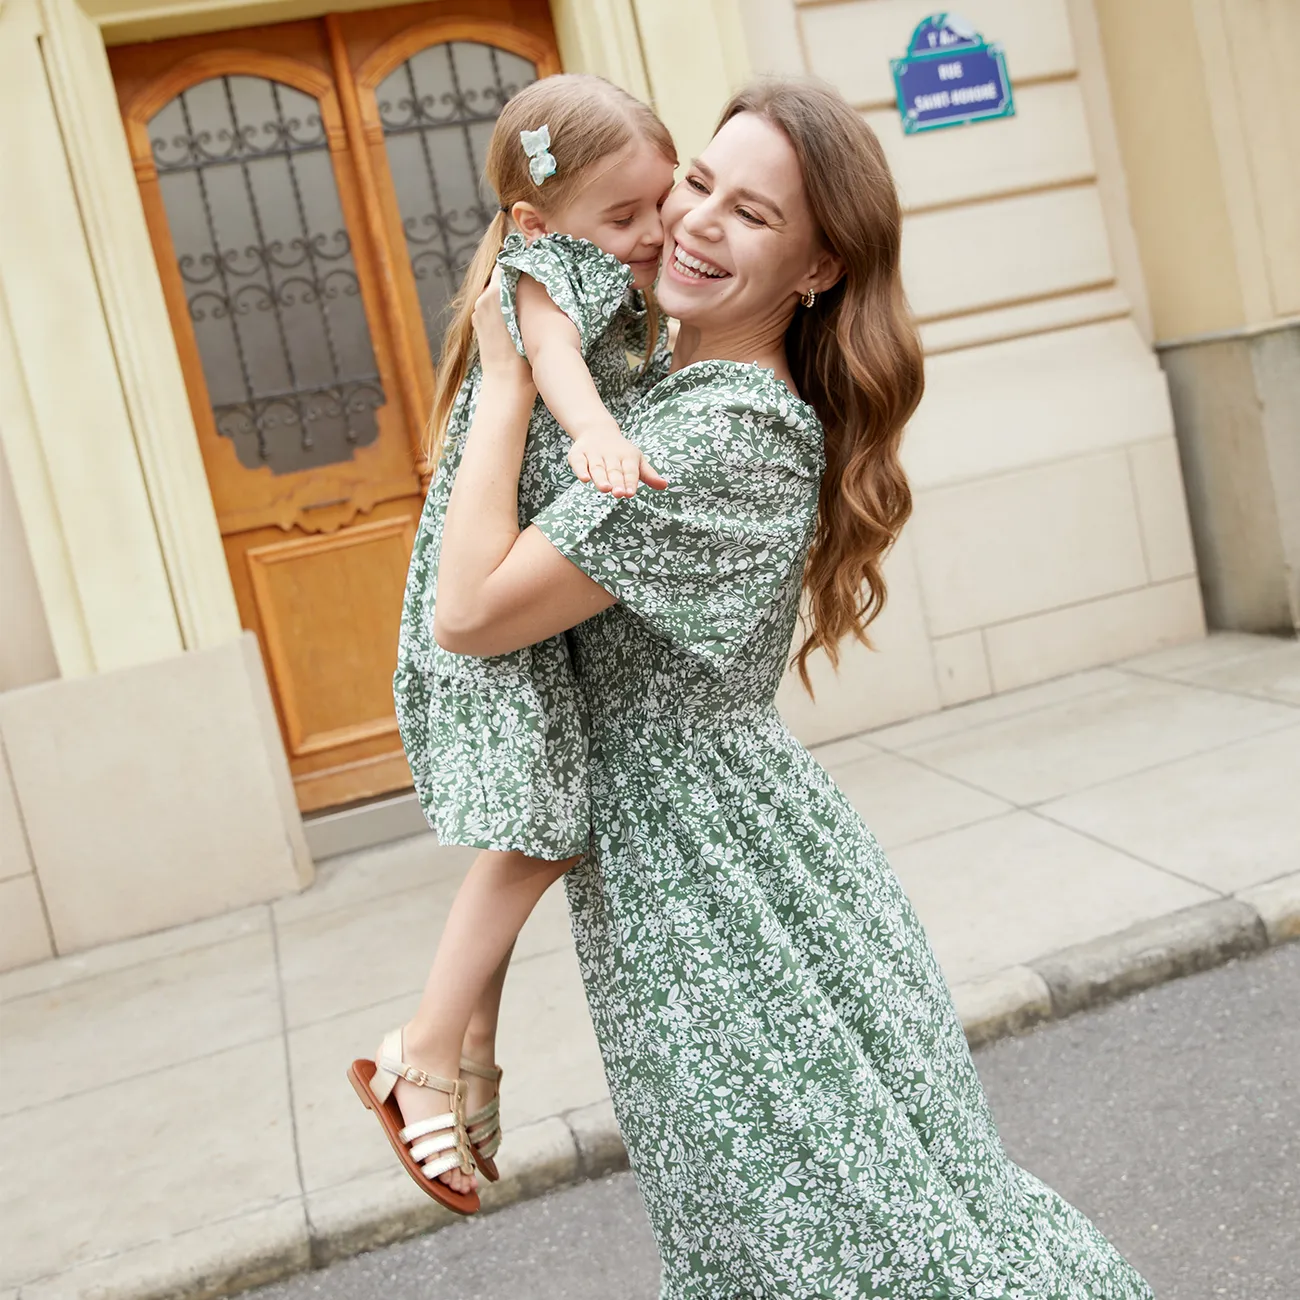 Family Matching Allover Floral Print Smocked Dresses and Colorblock Striped Cotton T-shirts Sets Green big image 1